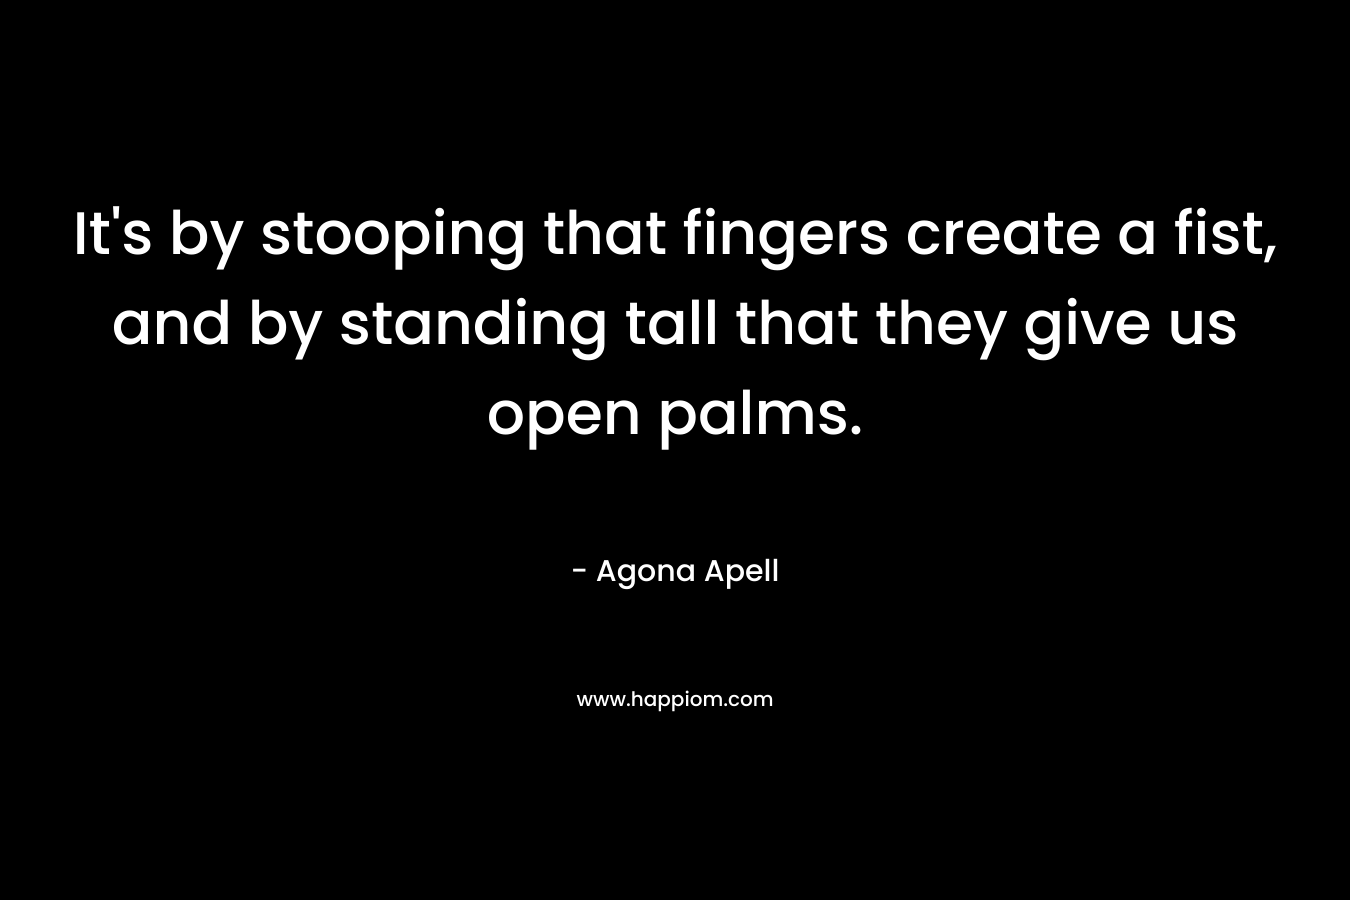 It's by stooping that fingers create a fist, and by standing tall that they give us open palms.